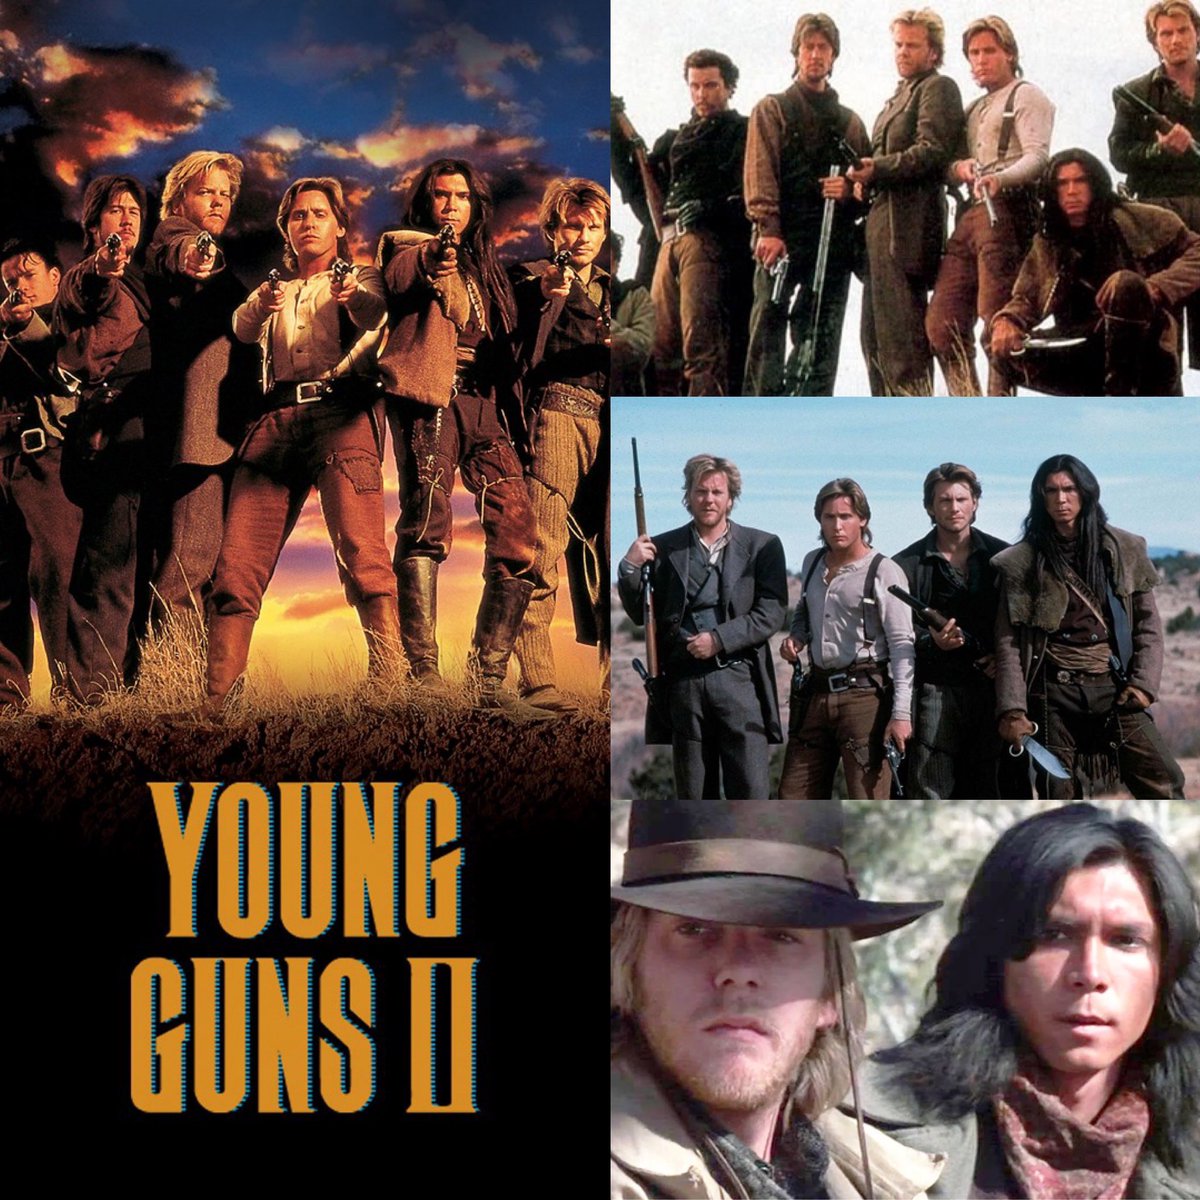 Released in 1988 #YoungGuns but technically both were released in August so I can post both 💜💜💜😉#YoungGuns2 #Pals #Regulators #MountUp @JohnFusco12 @LouDPhillips @GeoffBlake4 @RealKiefer @ChristianSlater